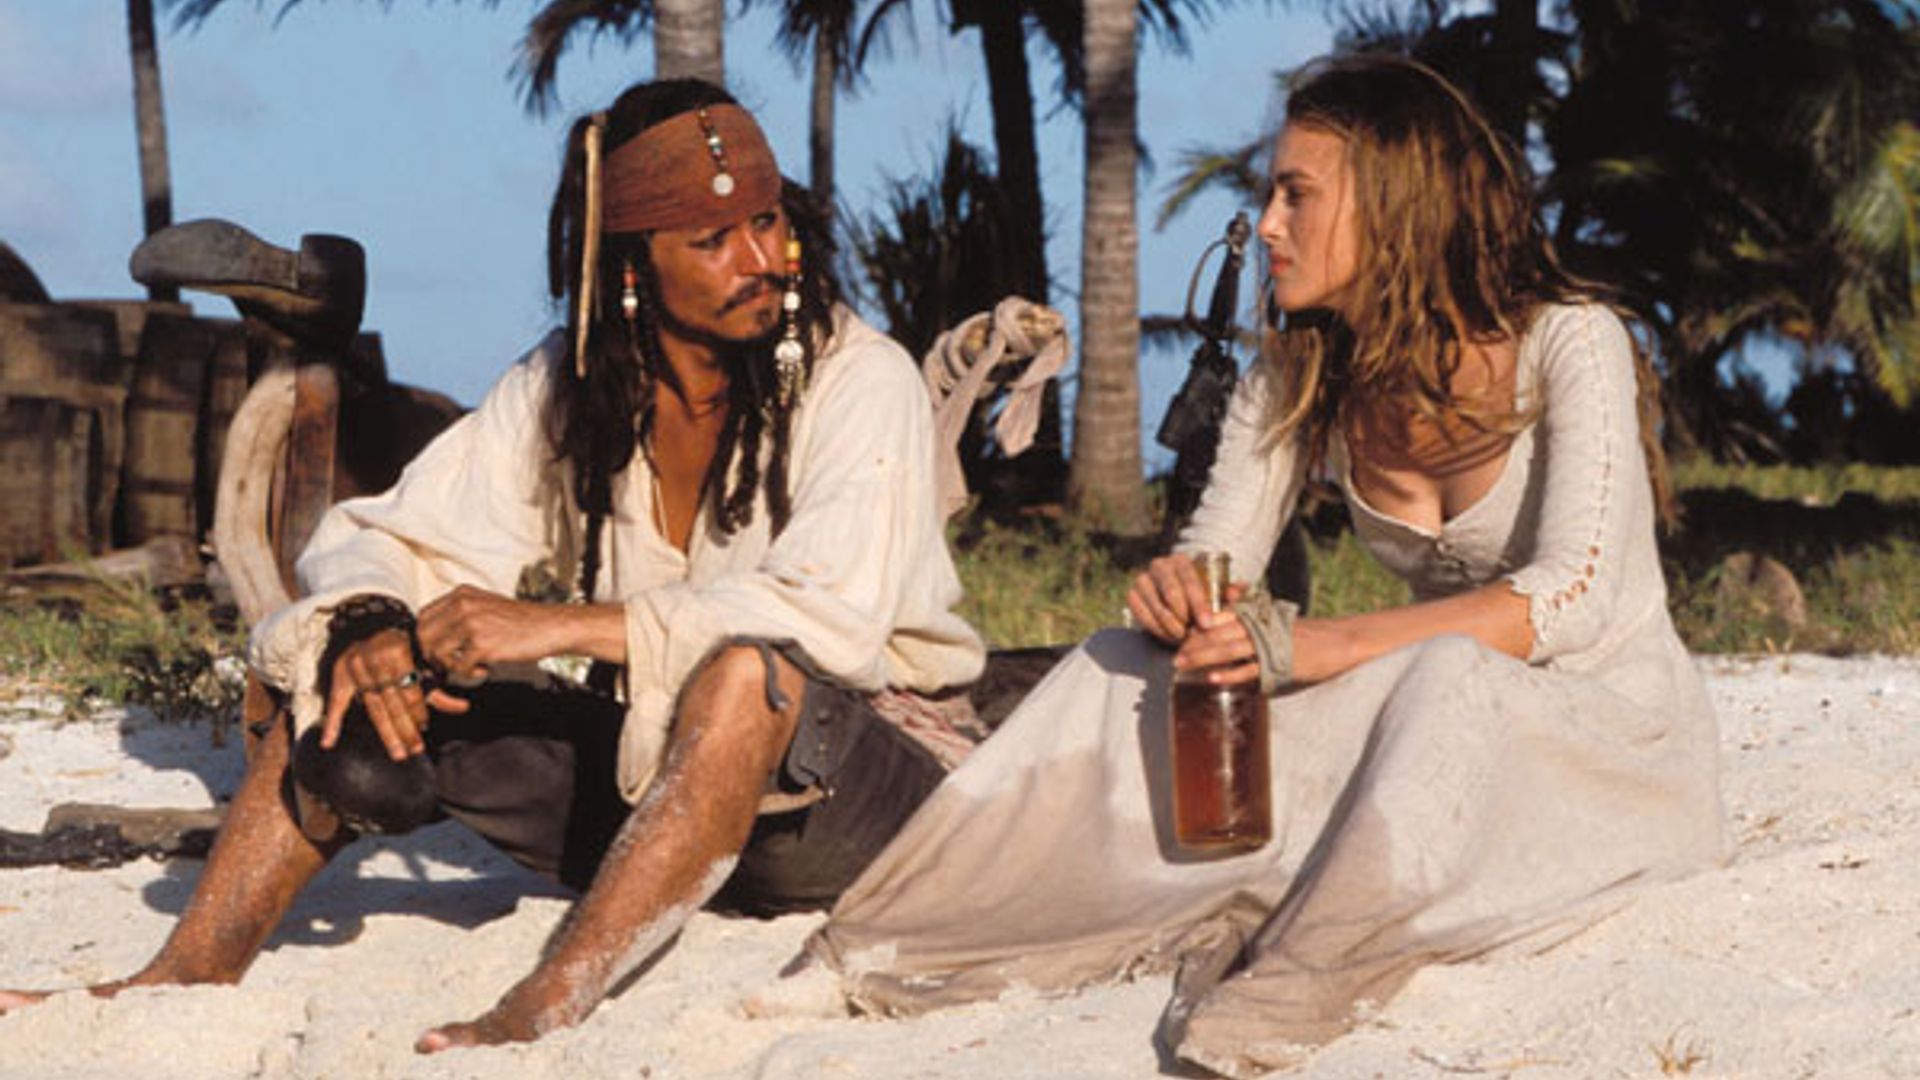 Where was Pirates of the Caribbean filmed?